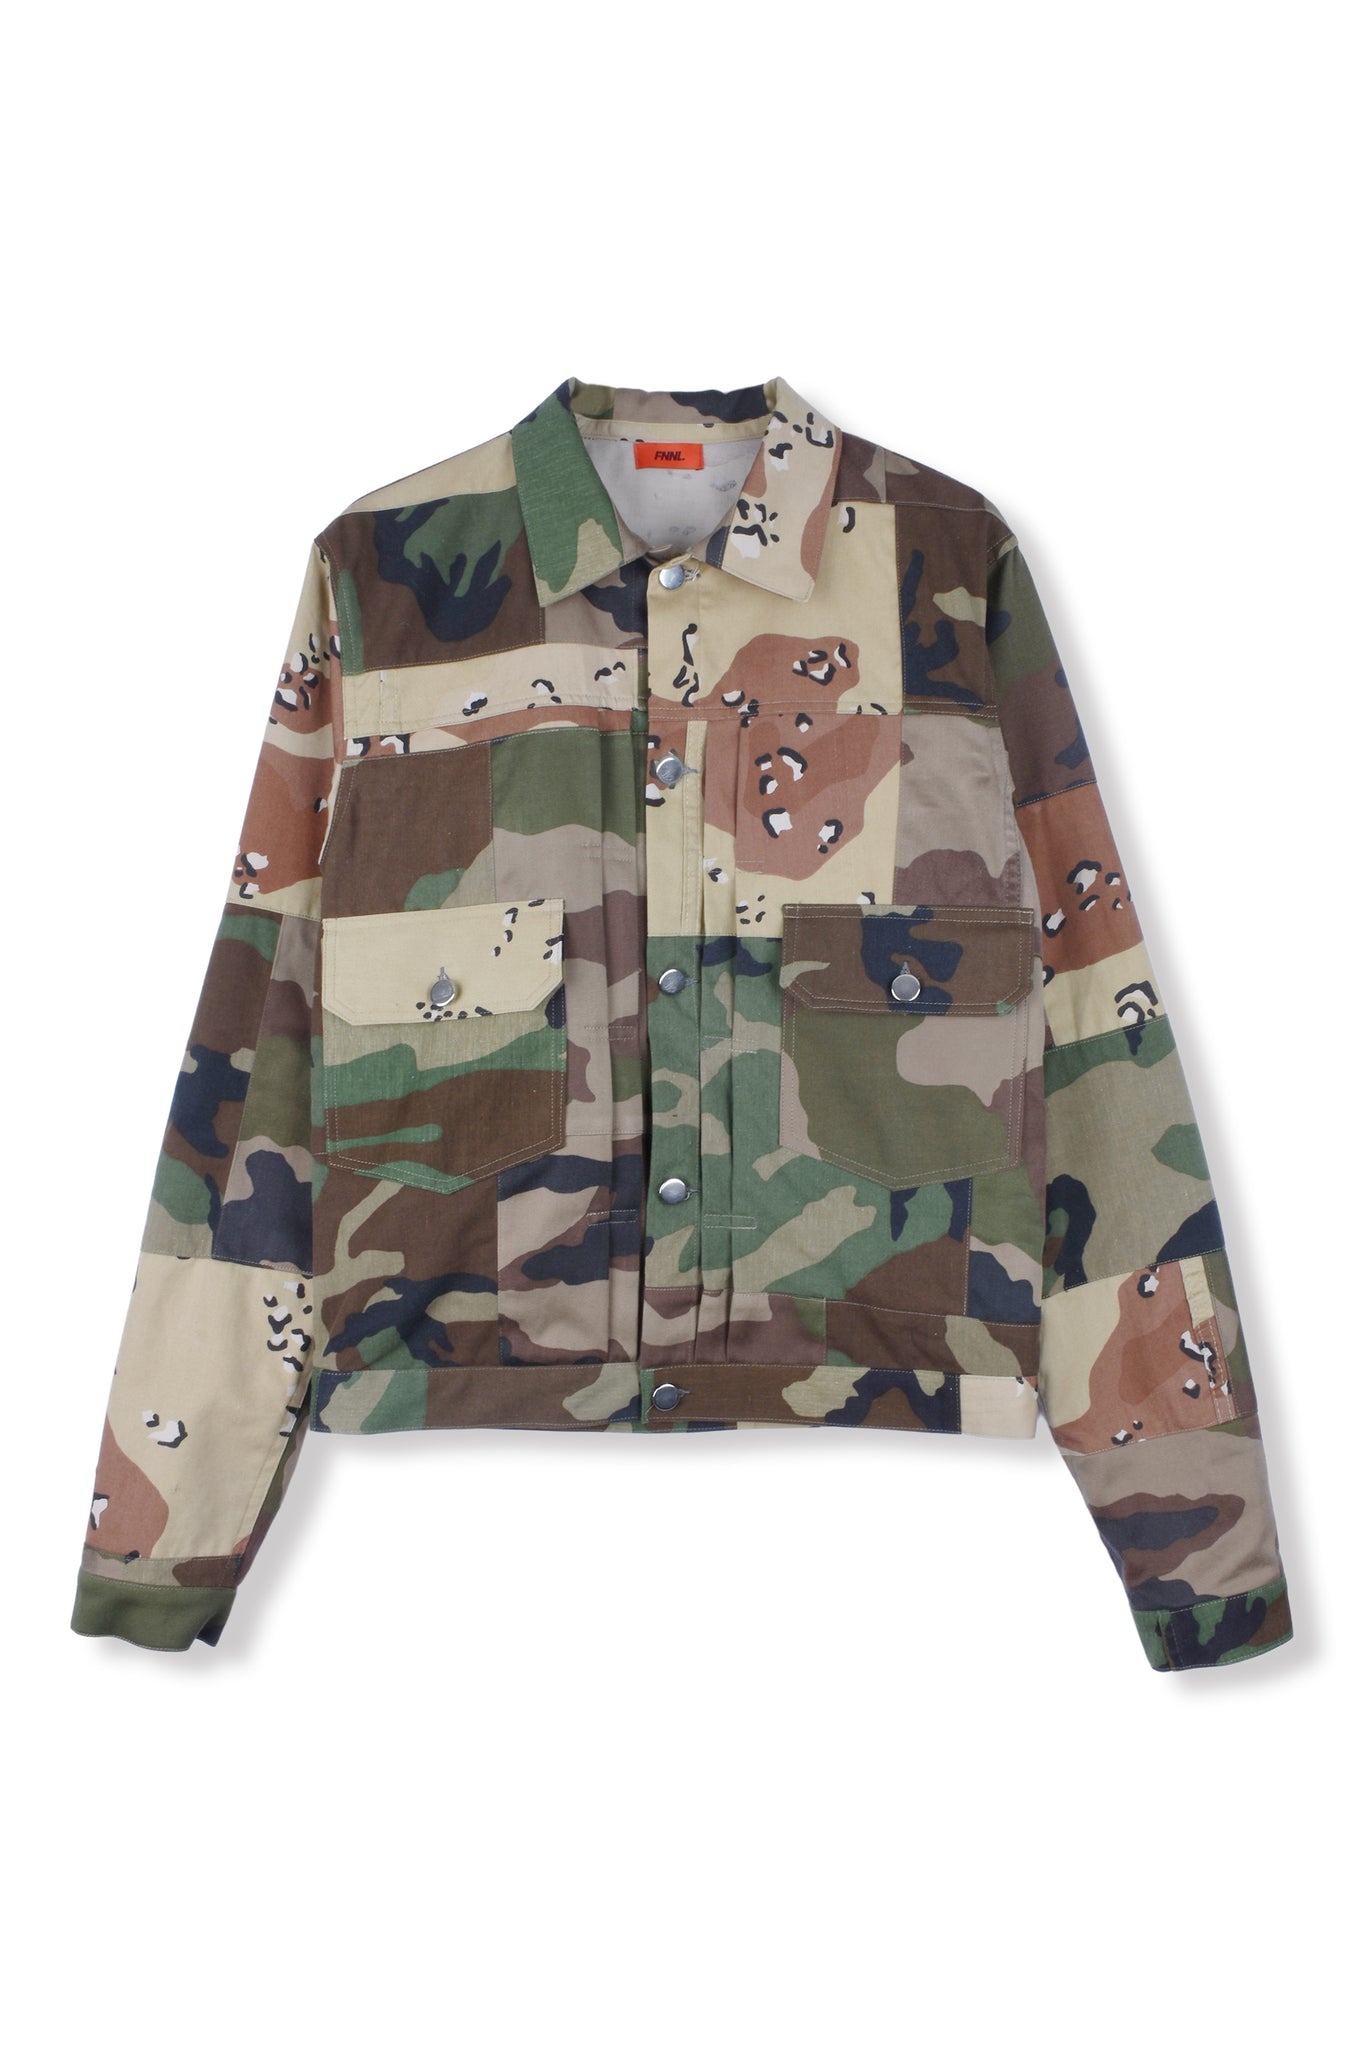 ONE-OFF CAMOUFLAGE PATCHWORKED JACKET 2ND TYPE